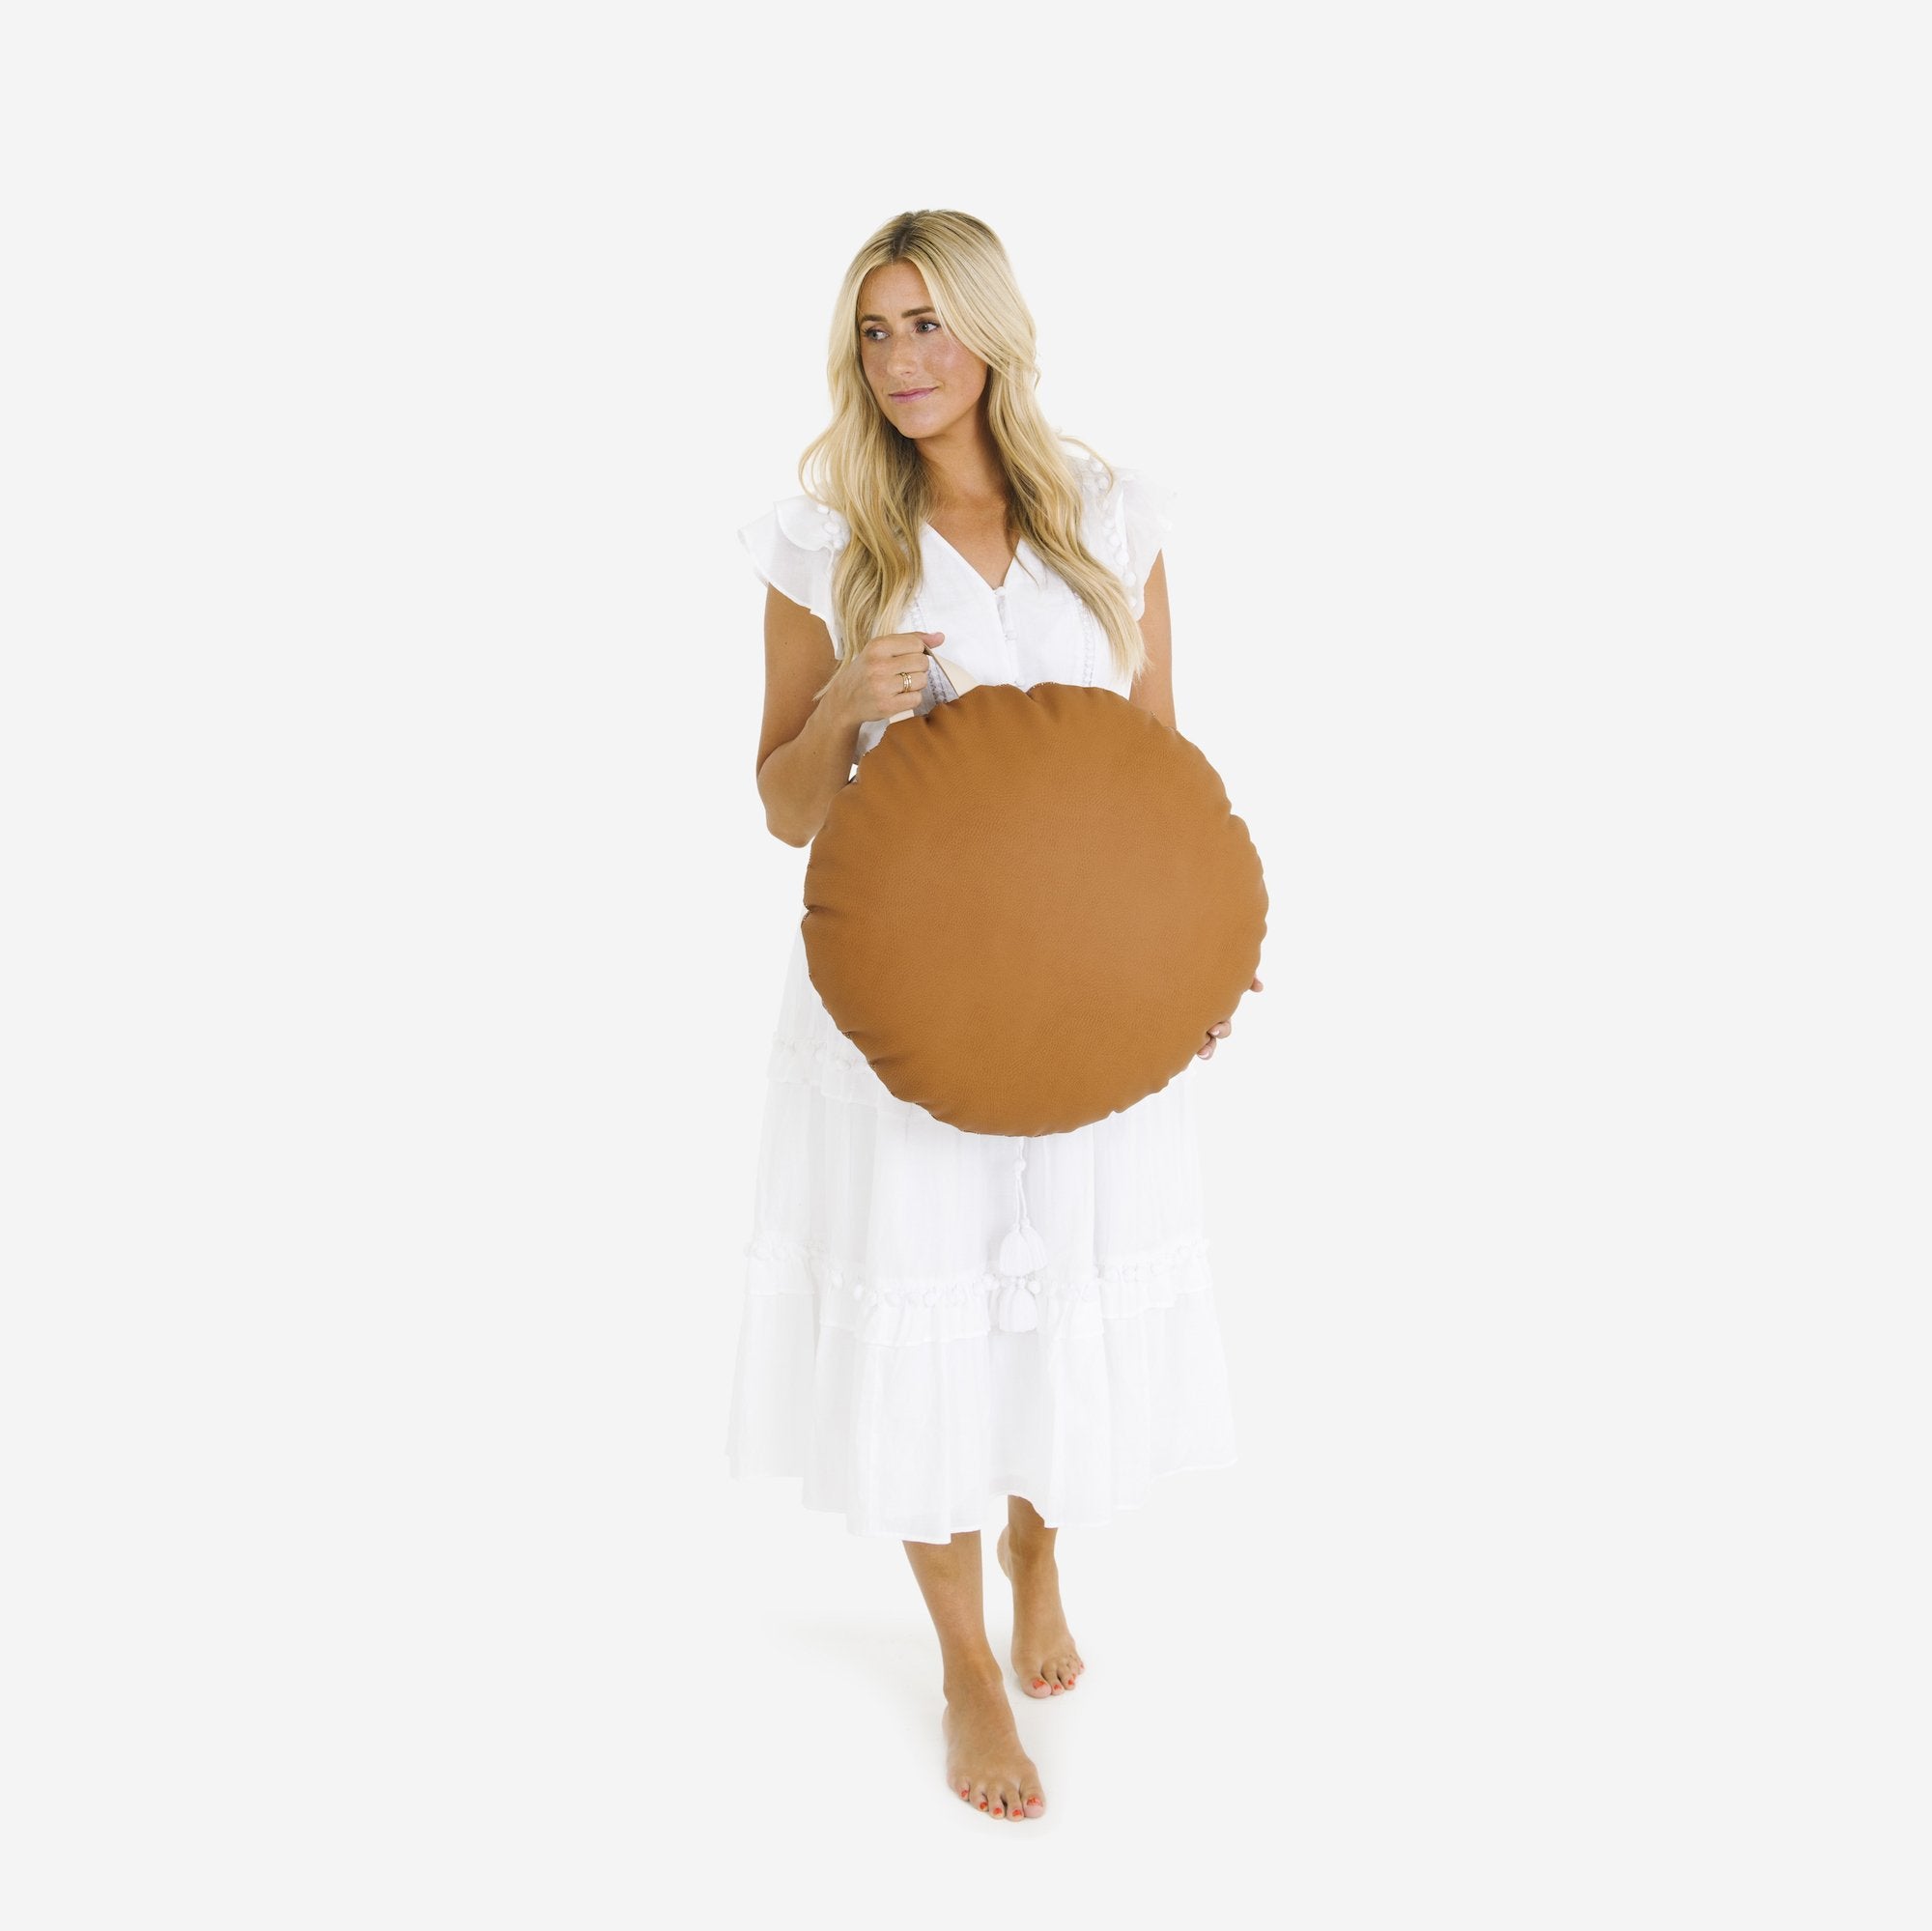 Ginger (on sale) / Circle@Woman holding the Ginger Circle Mini Floor Cushion